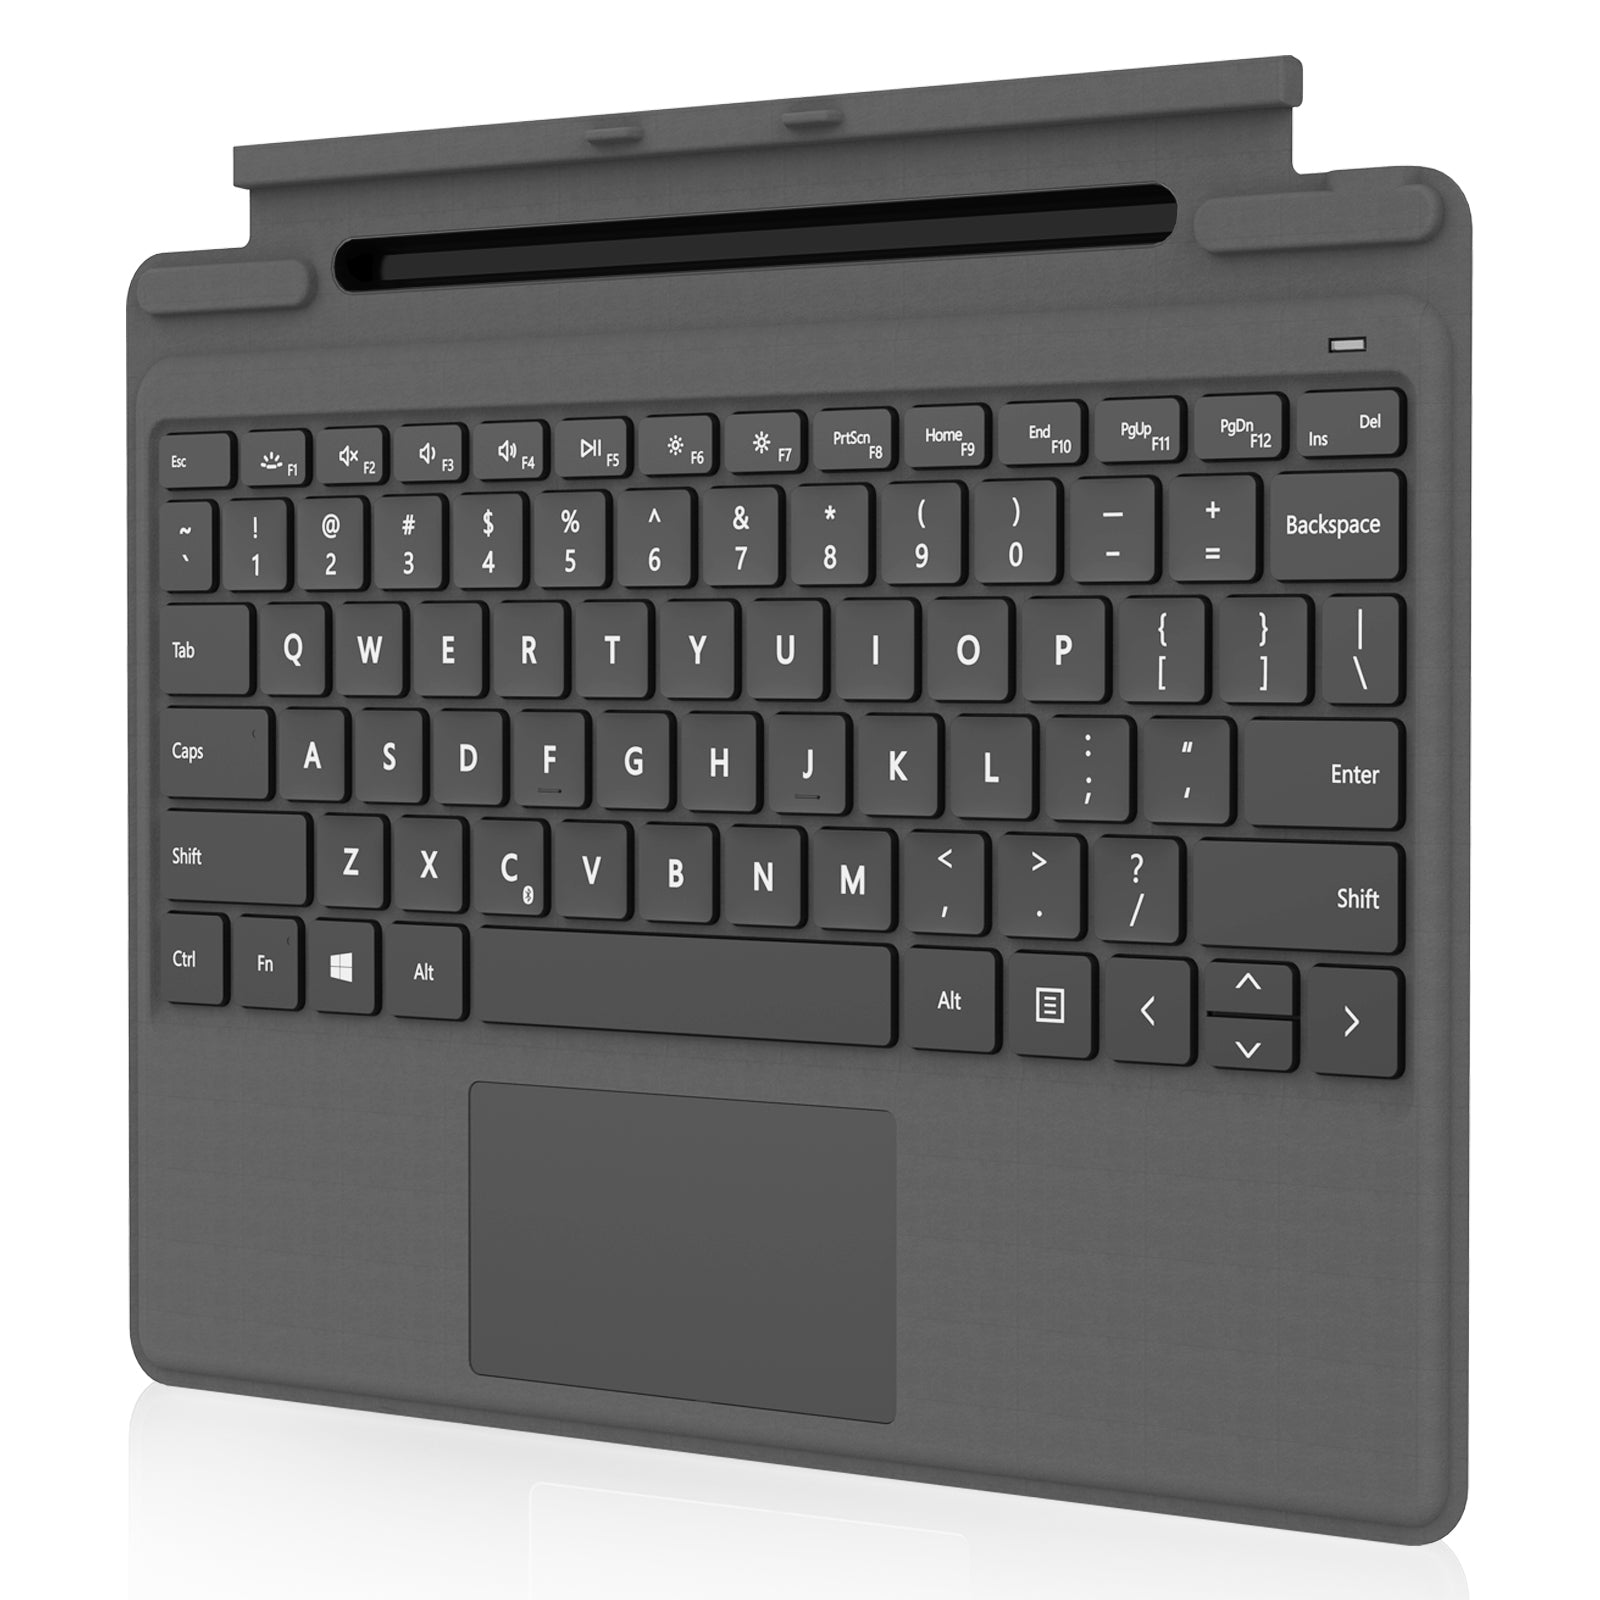 Microsoft STILL Doesn't Include a Keyboard With the New Surface Pro 5